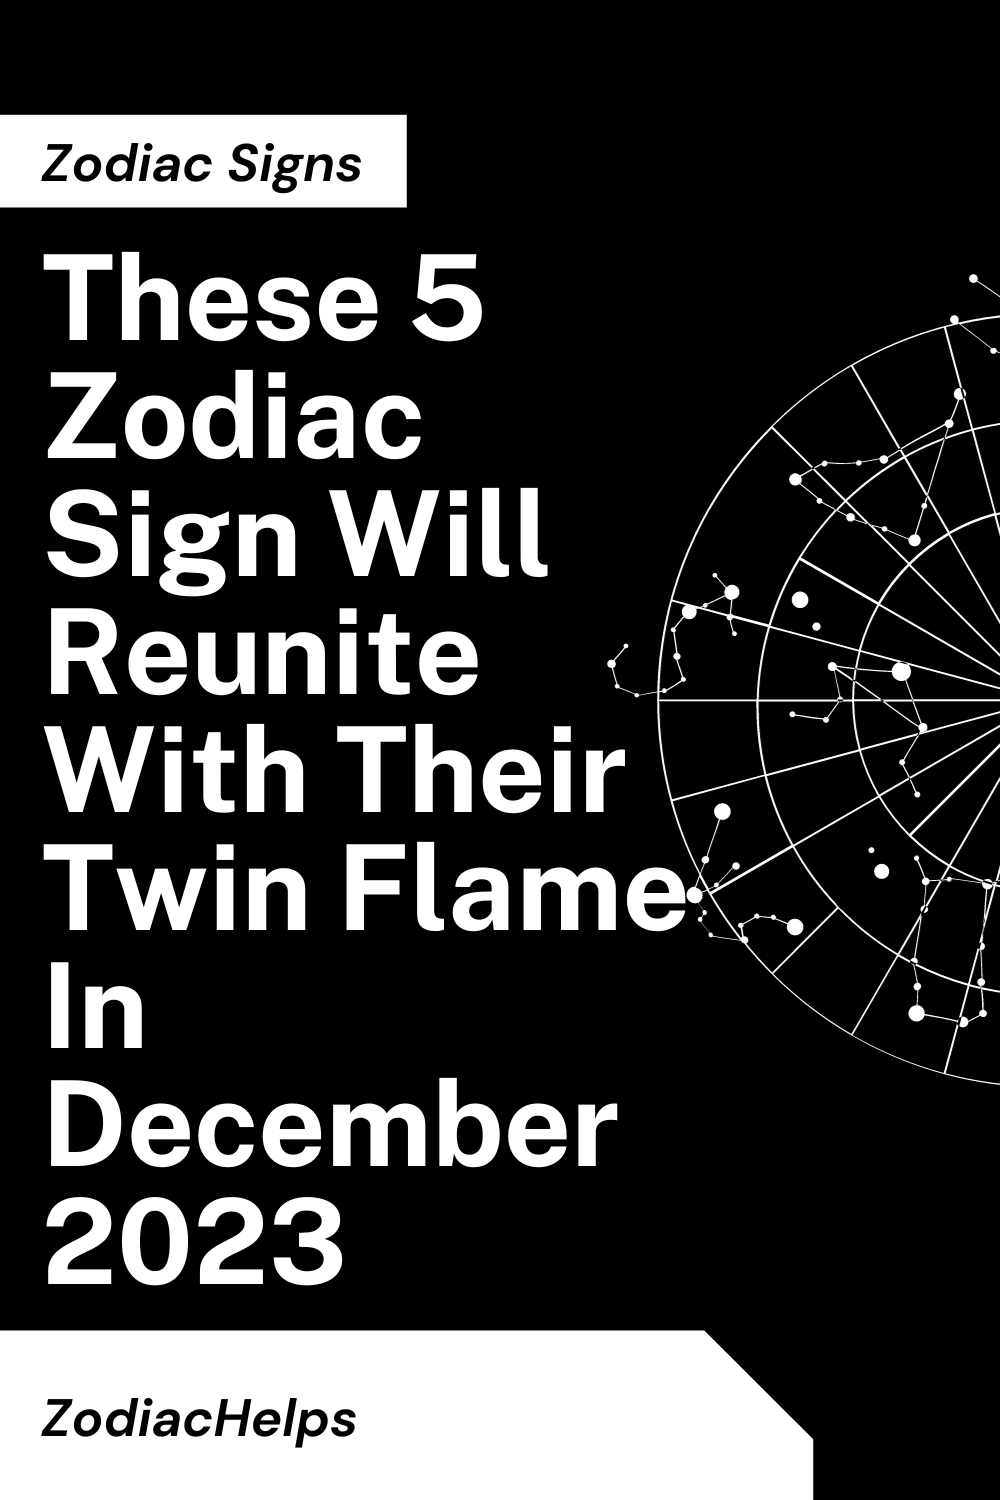 These 5 Zodiac Sign Will Reunite With Their Twin Flame In December 2023